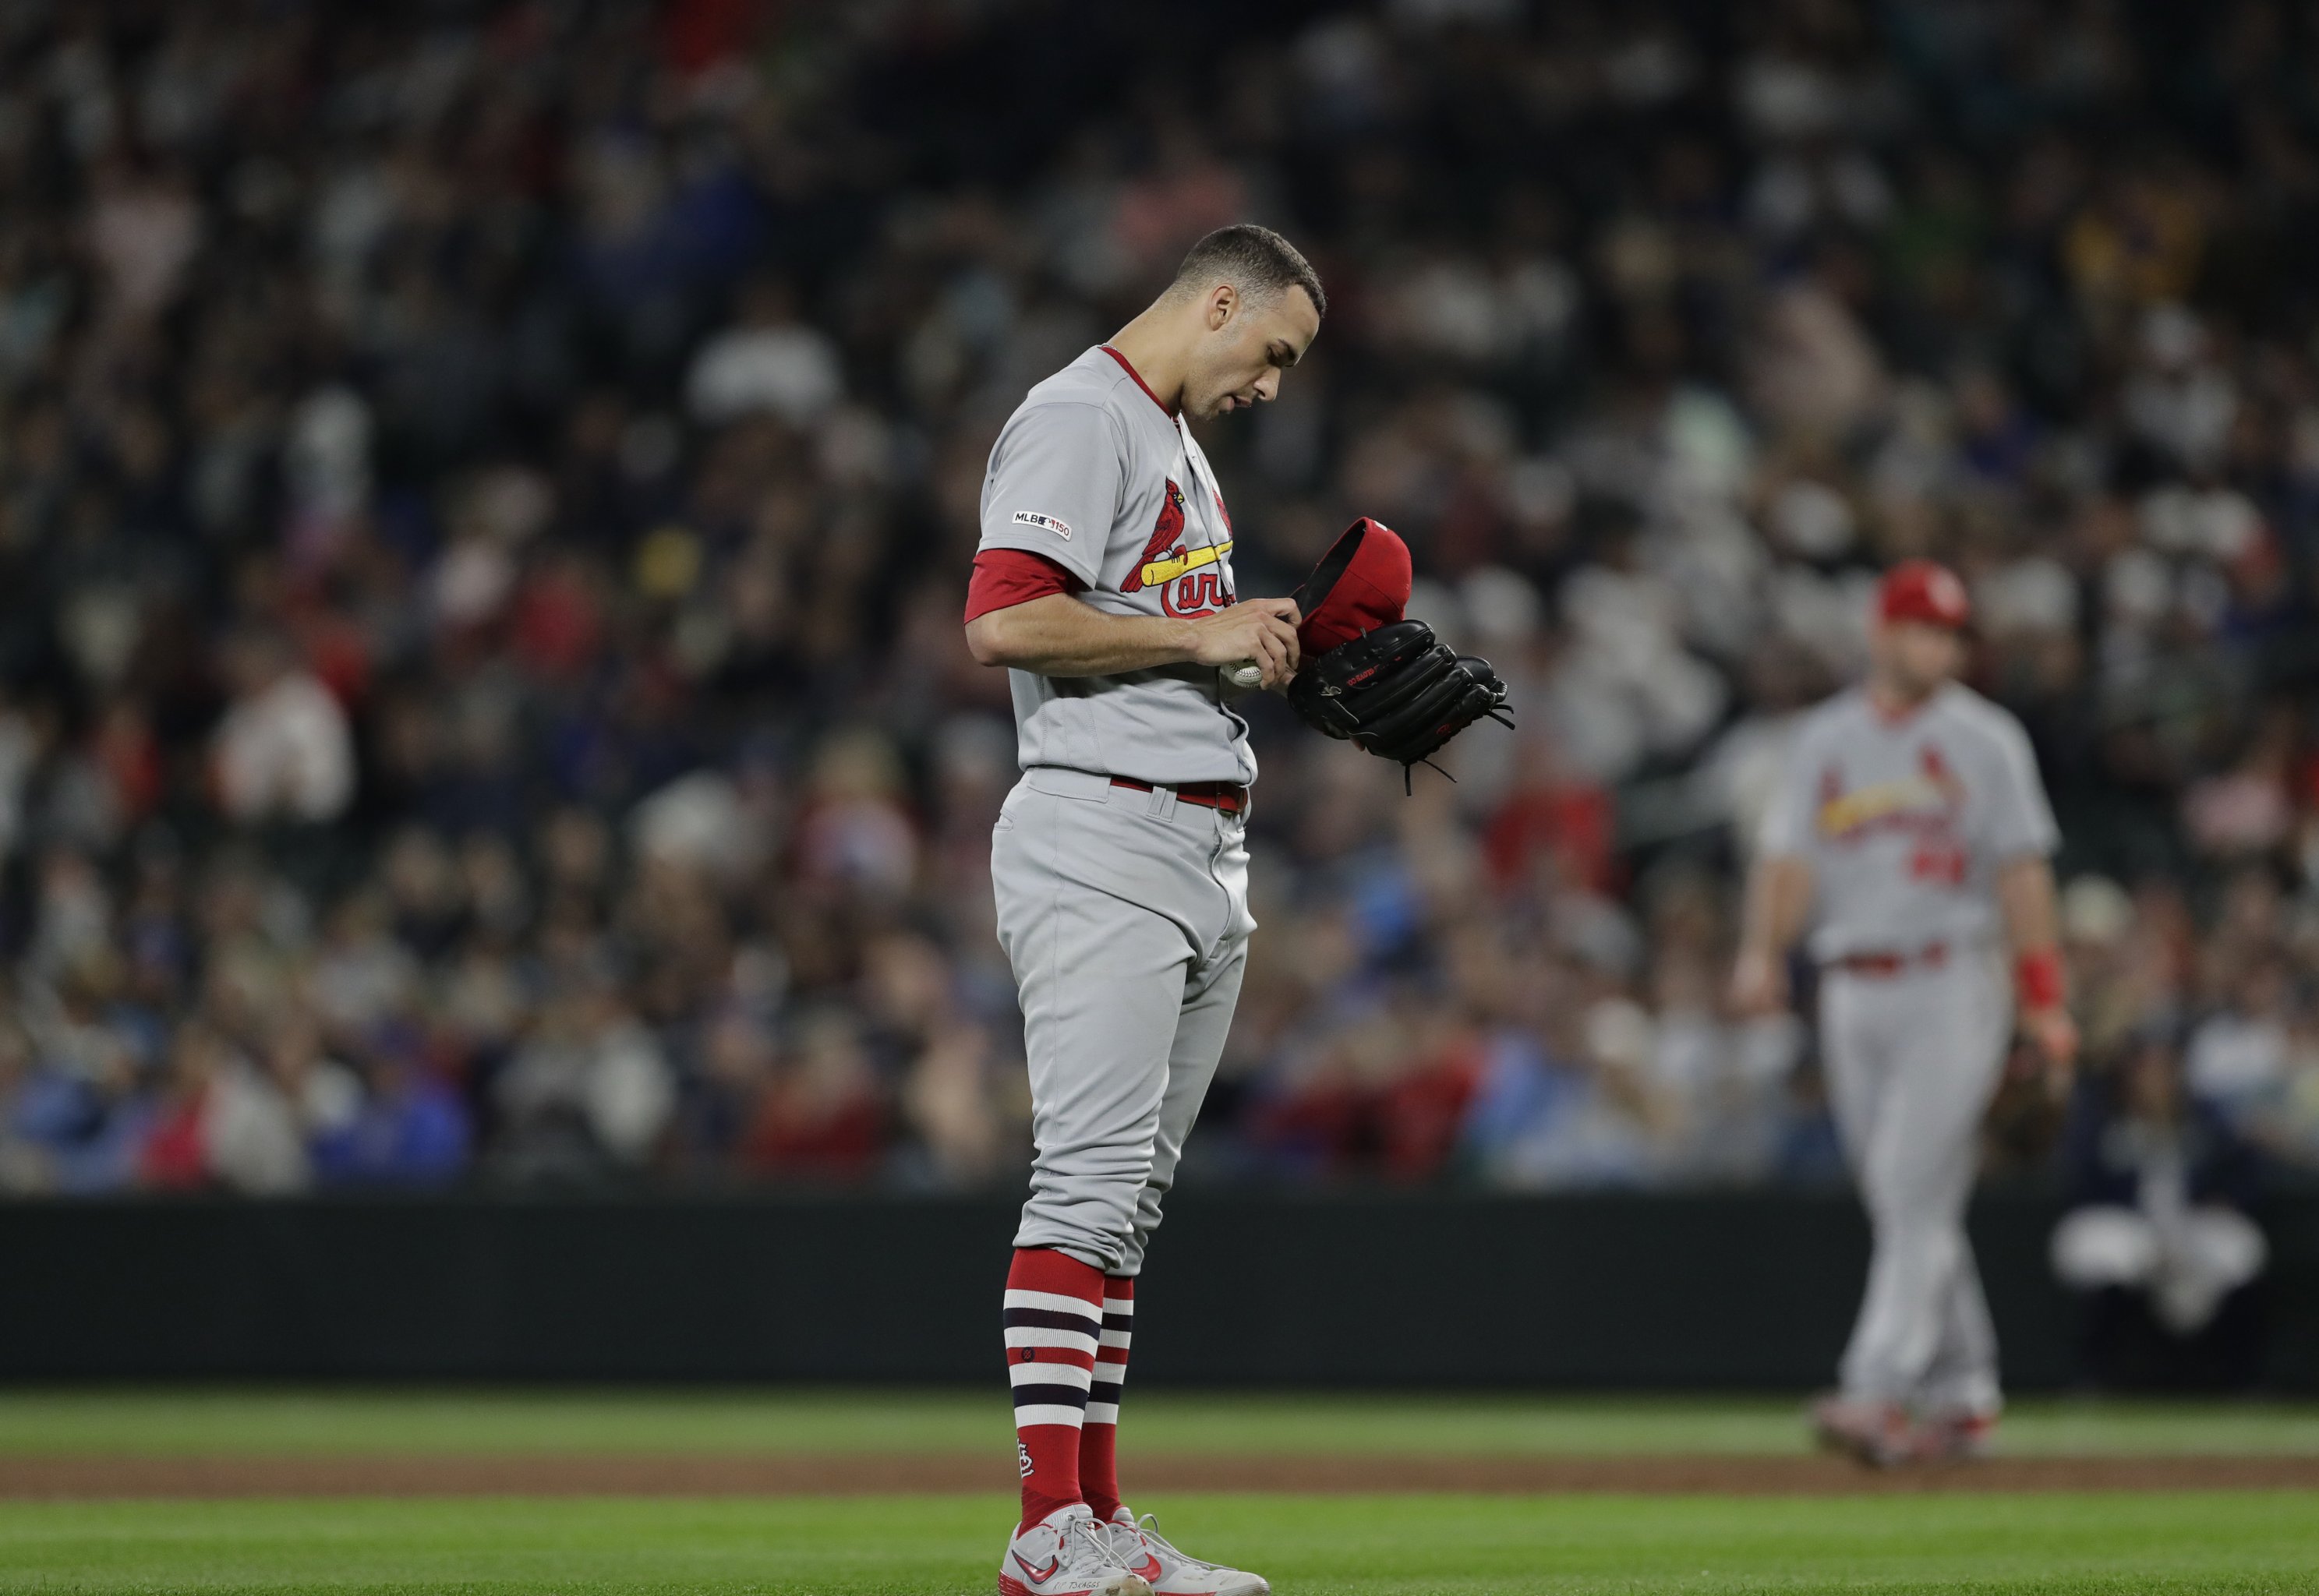 Jack Flaherty rips Tampa Bay Rays players who didn't wear Pride patch:  'Absolute joke